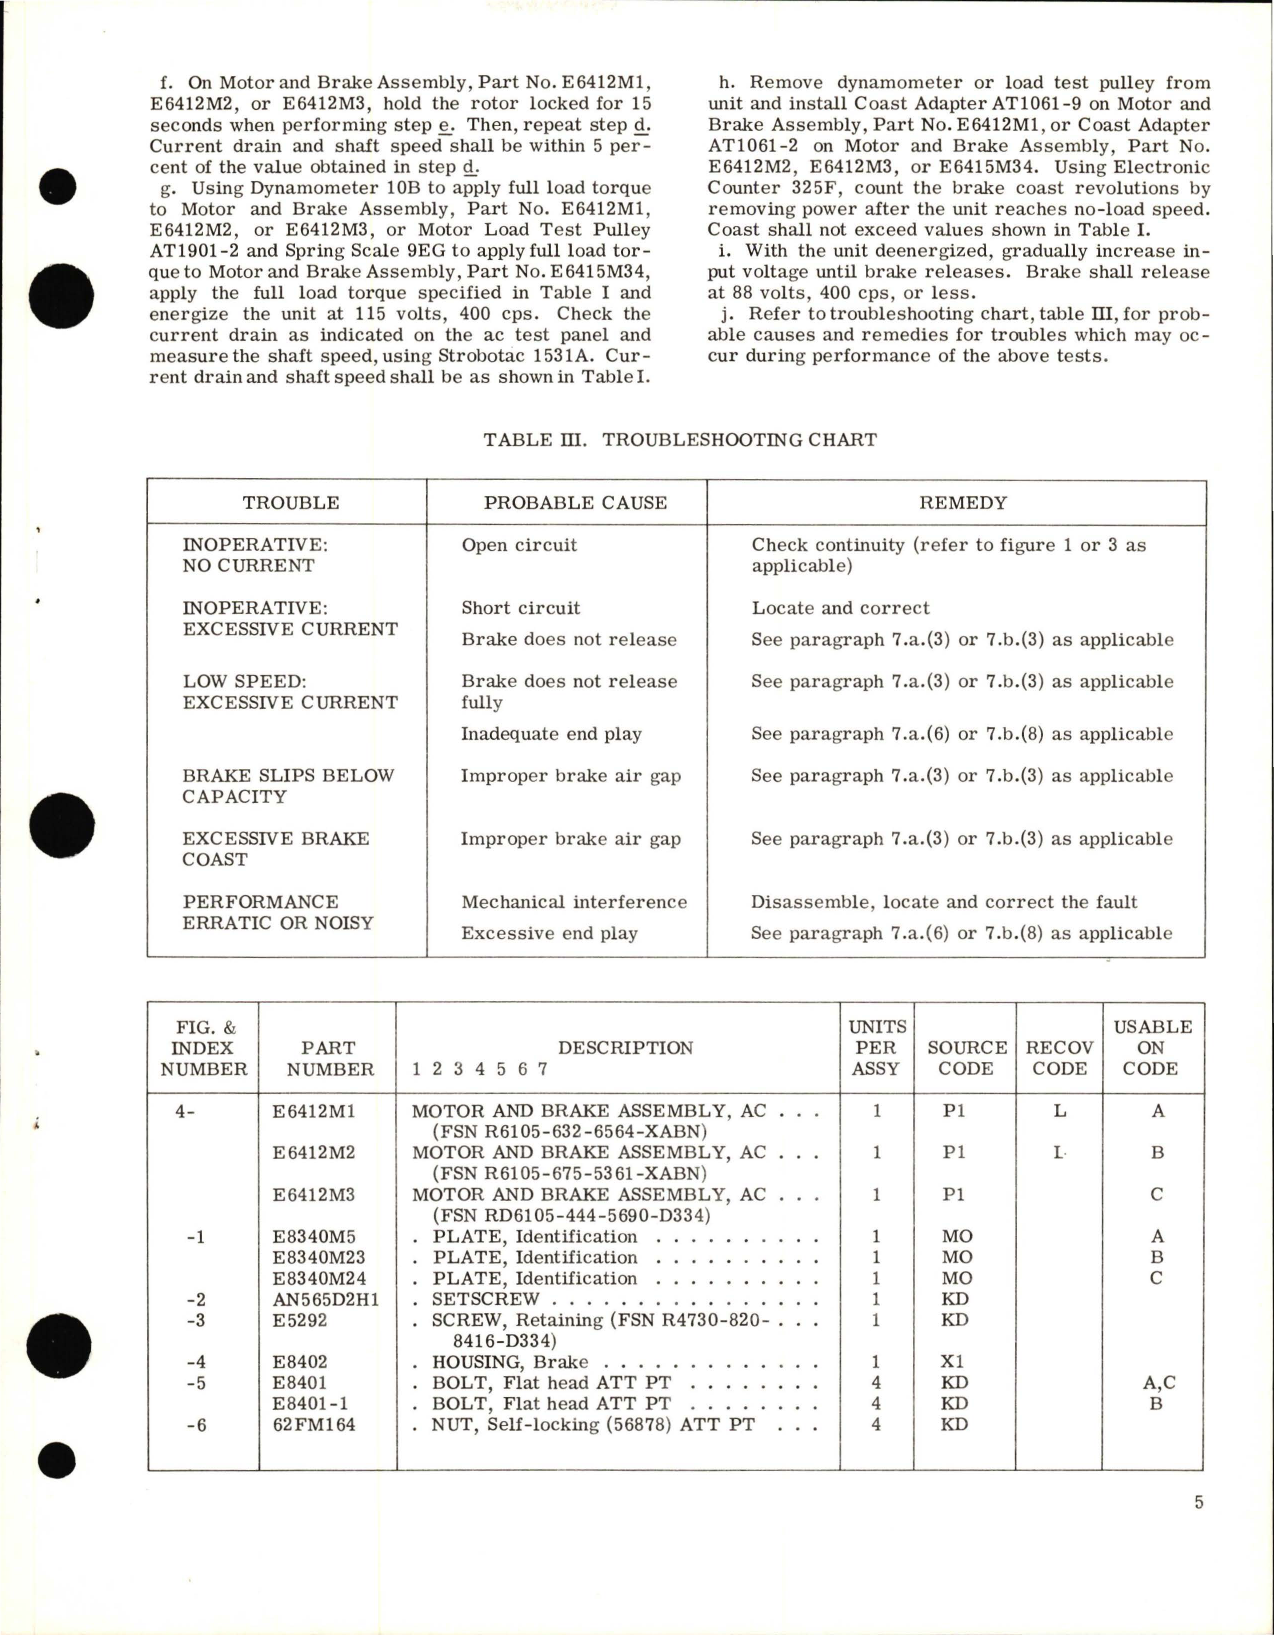 Sample page 5 from AirCorps Library document: Overhaul Instructions with Parts Breakdown for Motor and Brake Assembly - Part E6412M1, E6412M2, E6412M3 and E6415M34